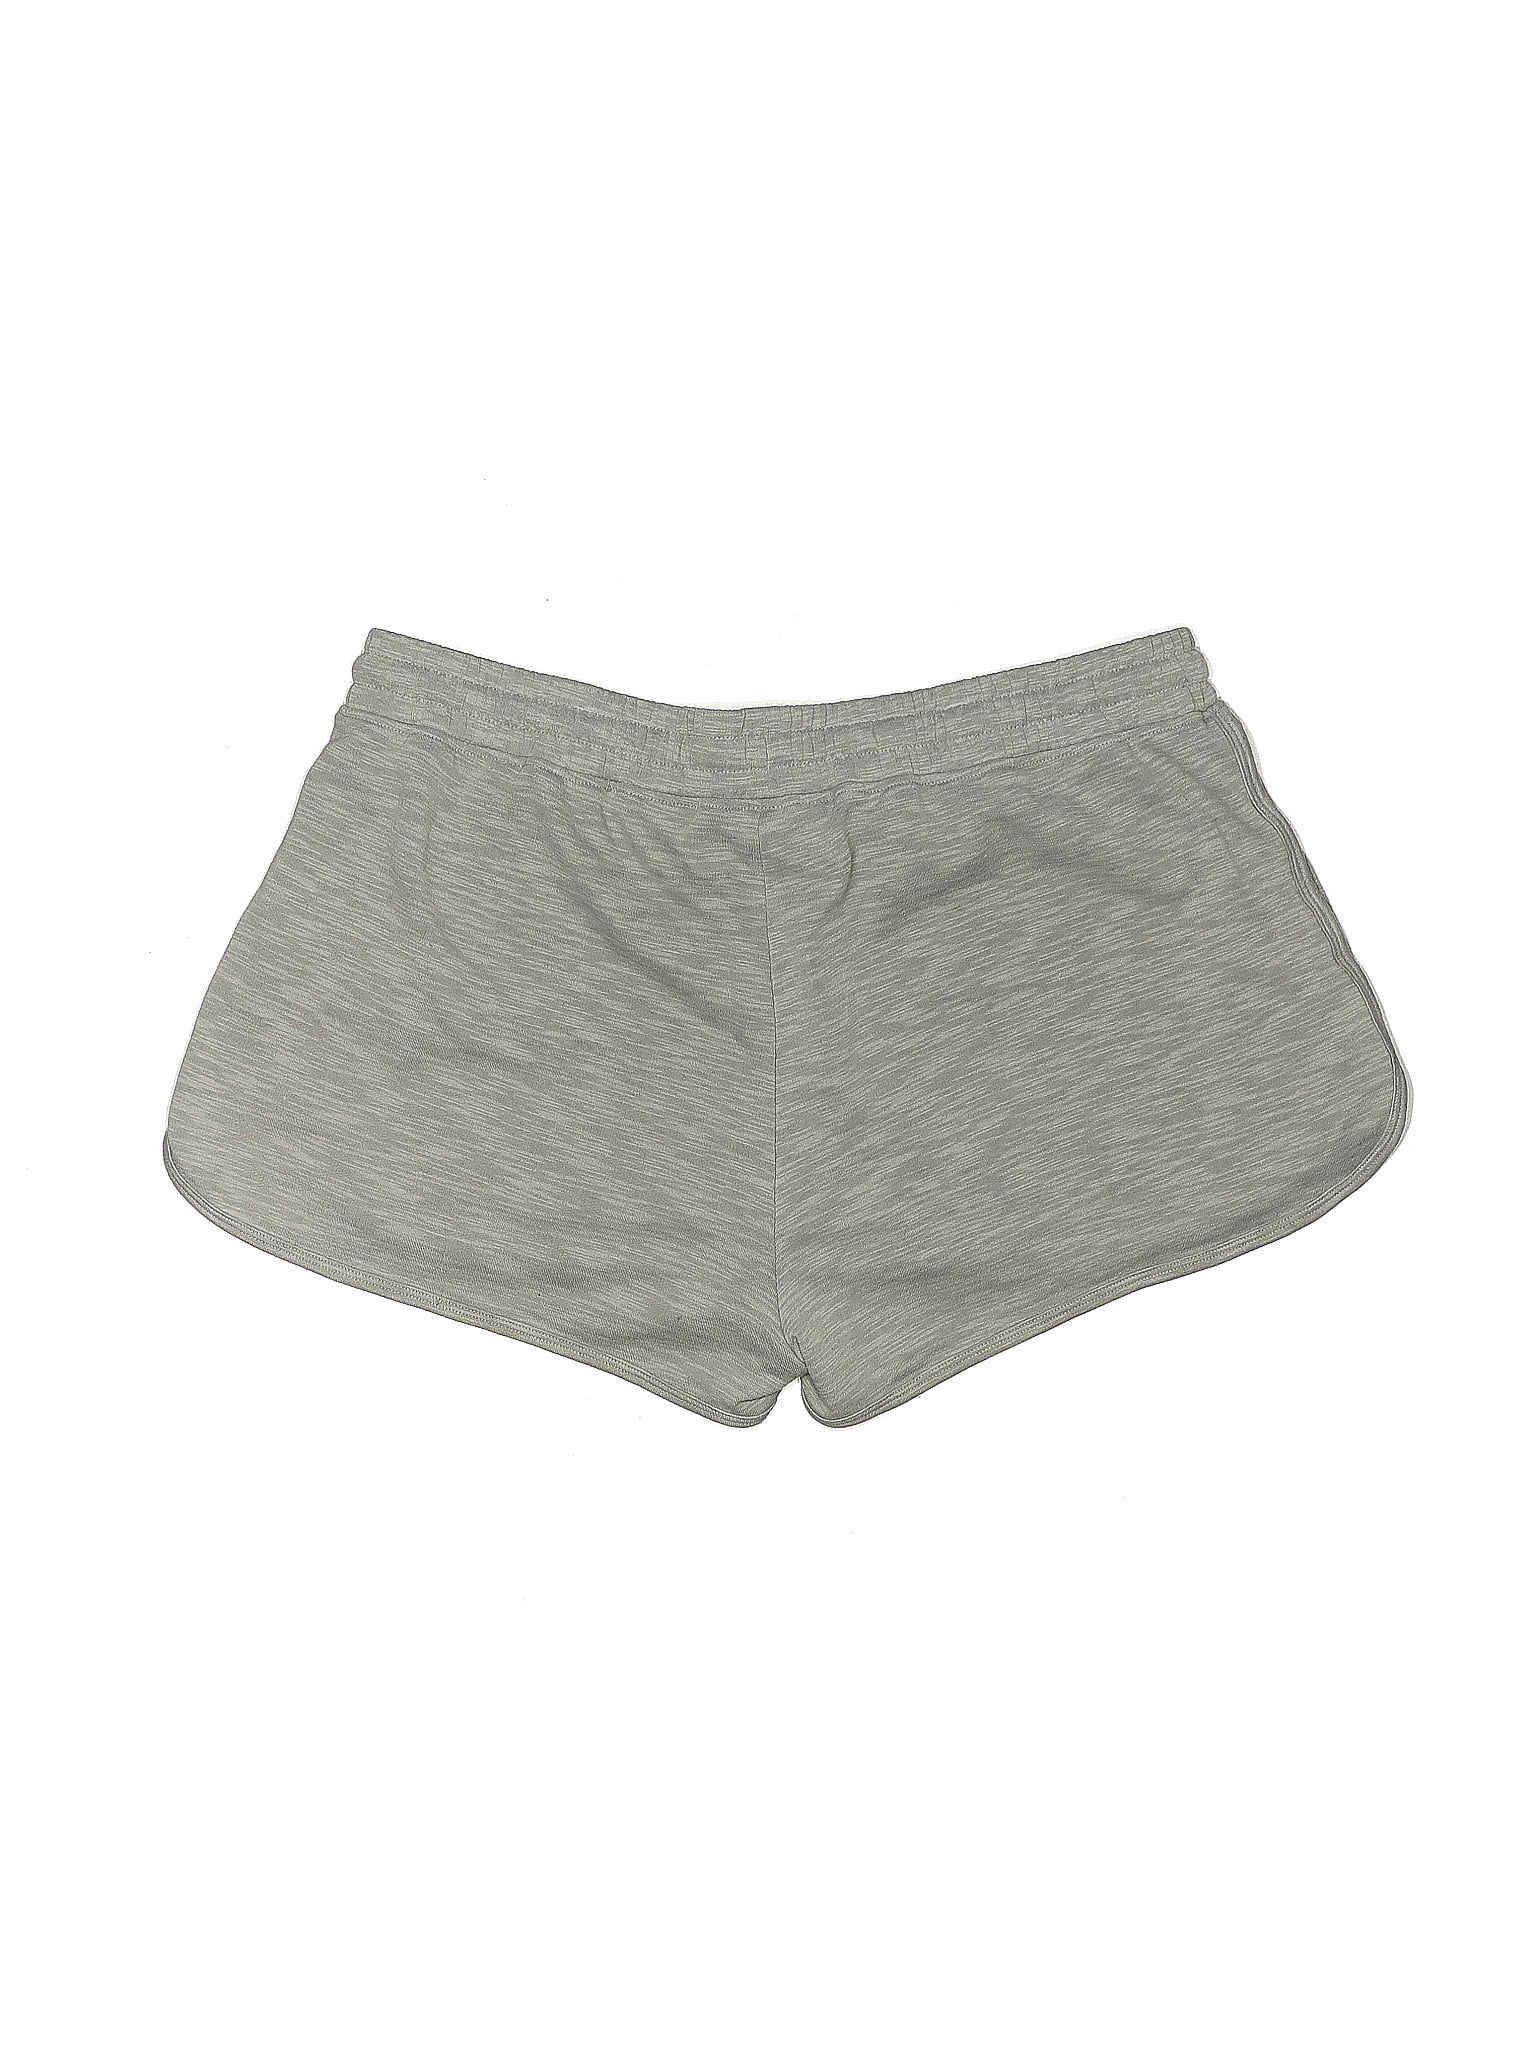 MTA Sport Women's Shorts On Sale Up To 90% Off Retail